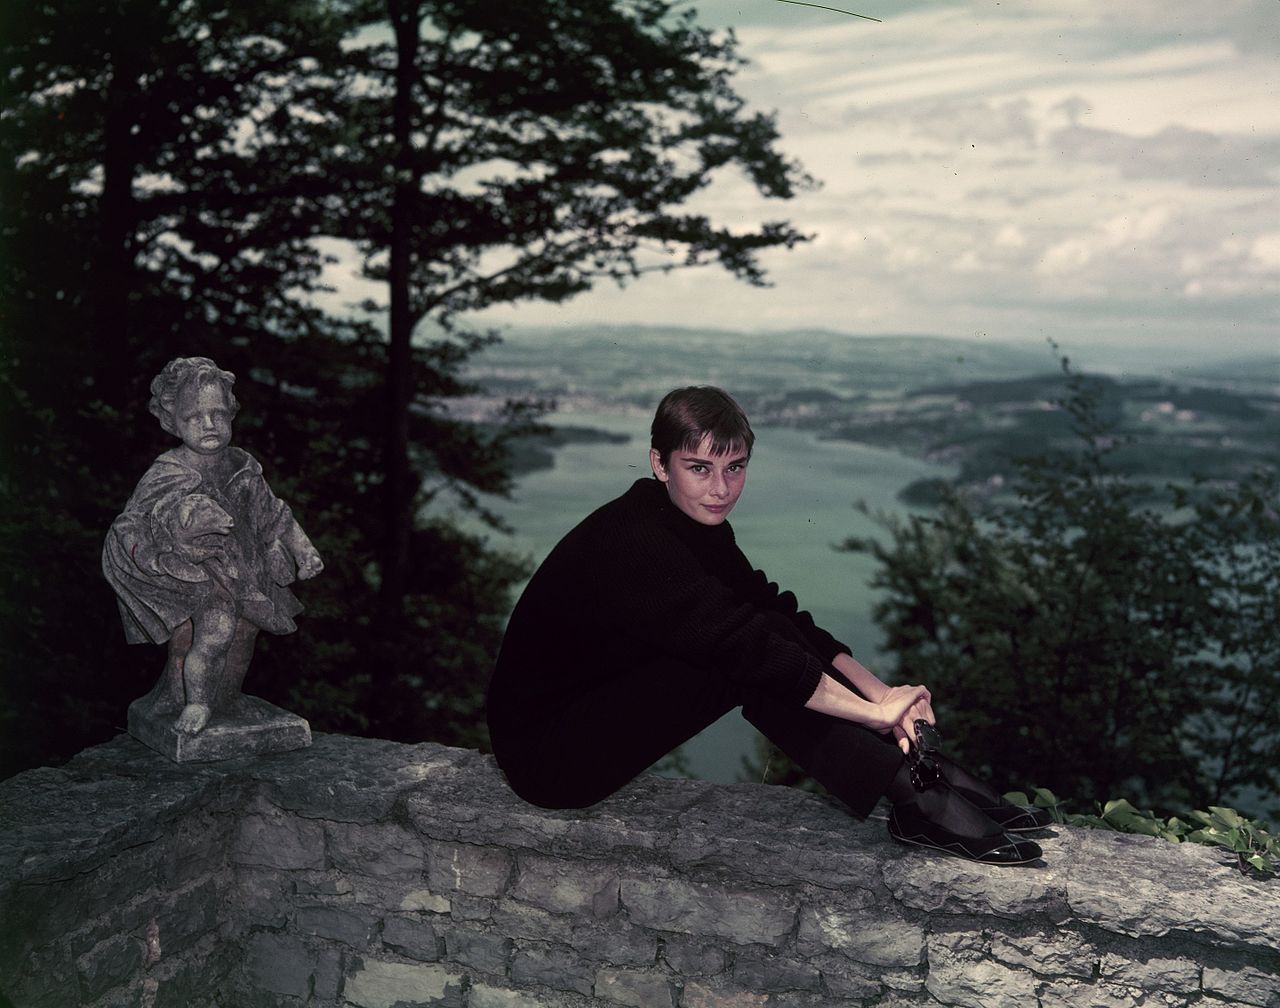 a-short-haired-Audrey-Hepburn-wearing-her-signature-all-black-look-sitting-on-a-ledge